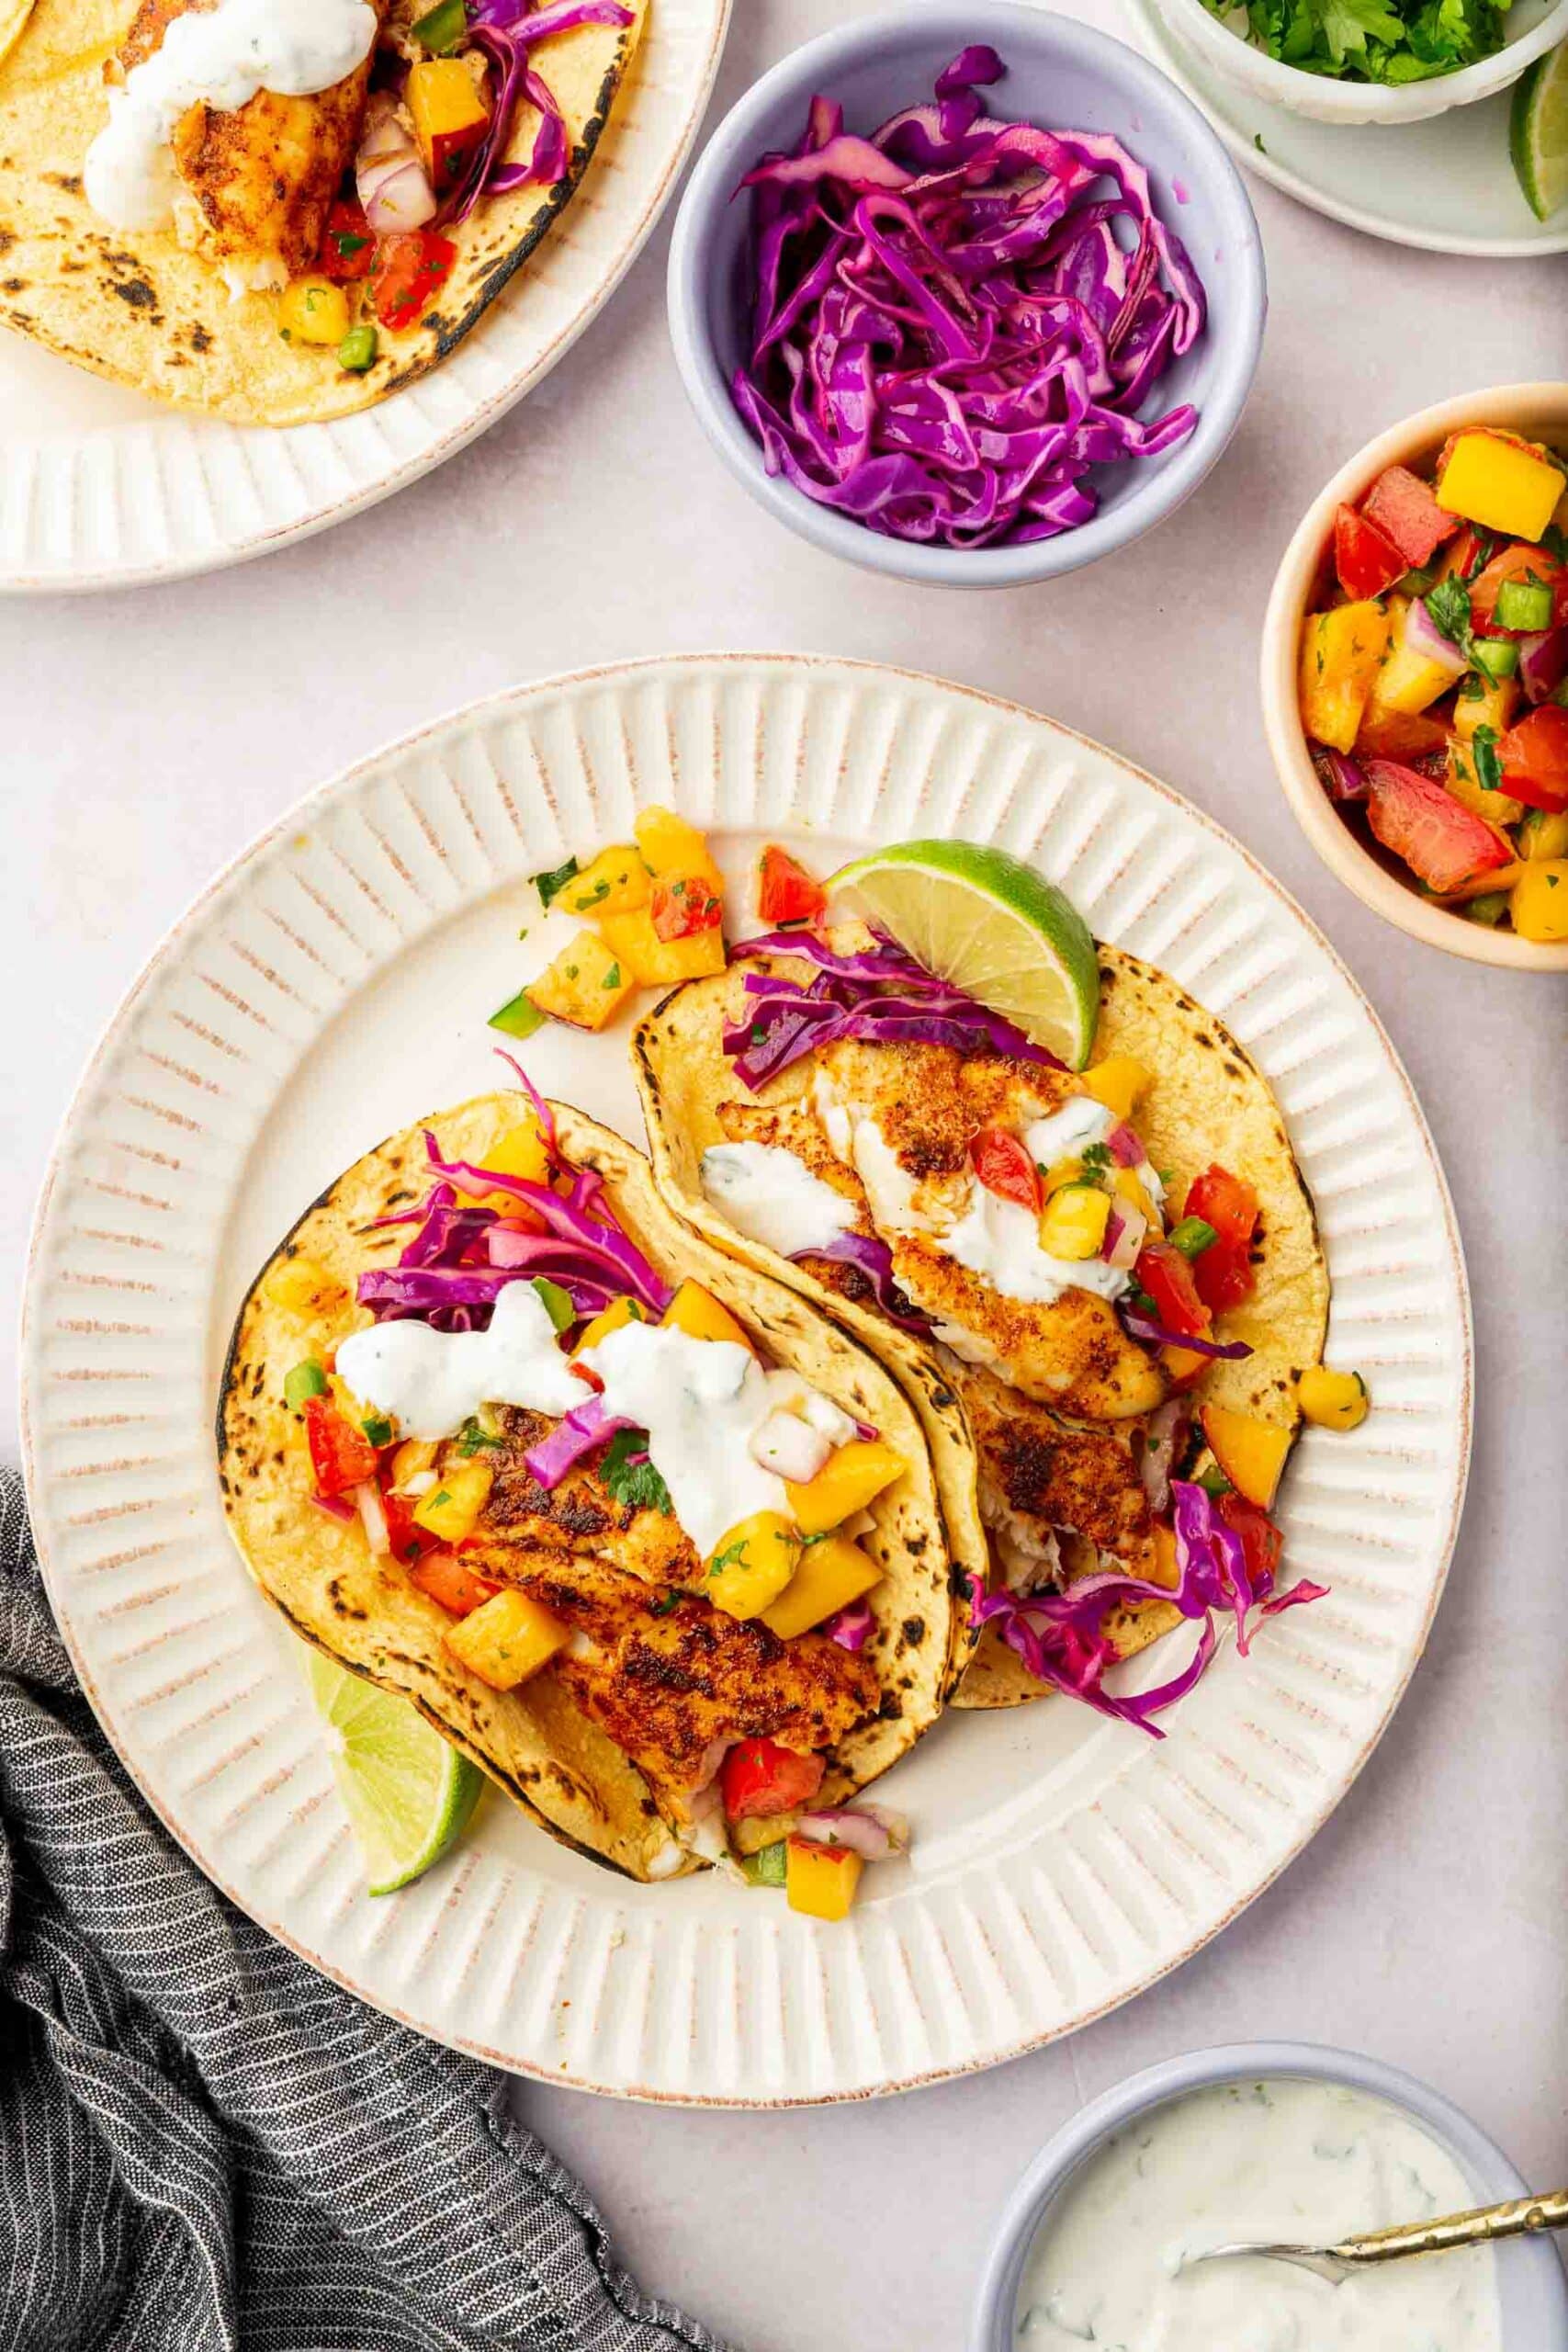 An overhead view of two fish tacos on charred corn tortillas topped with sour cream, fruit salsa, and red cabbage with bowls of slaw, fruit salsa, and crema to the side.